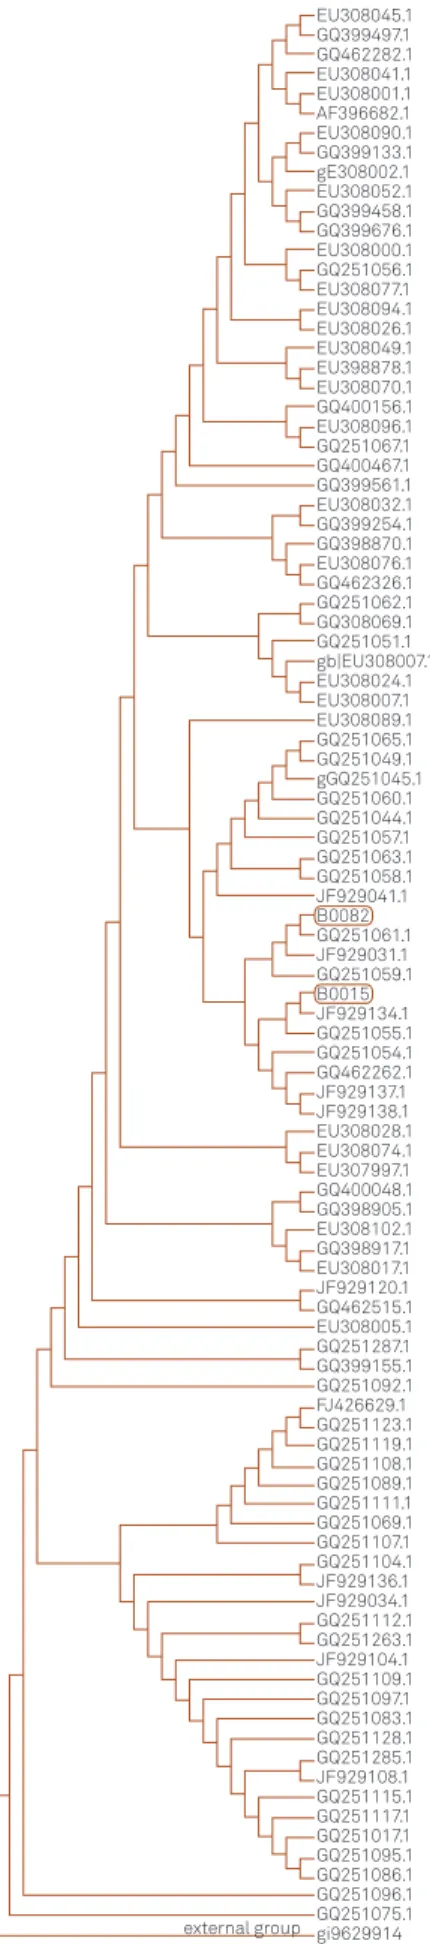 Figure 2. Phylogenetic tree resulted from nucleotide sequences analysis of HIV-1 pol gene from patient 1 (B0015) and 2 (B0082) and other HIV-1 sequences from genbank.